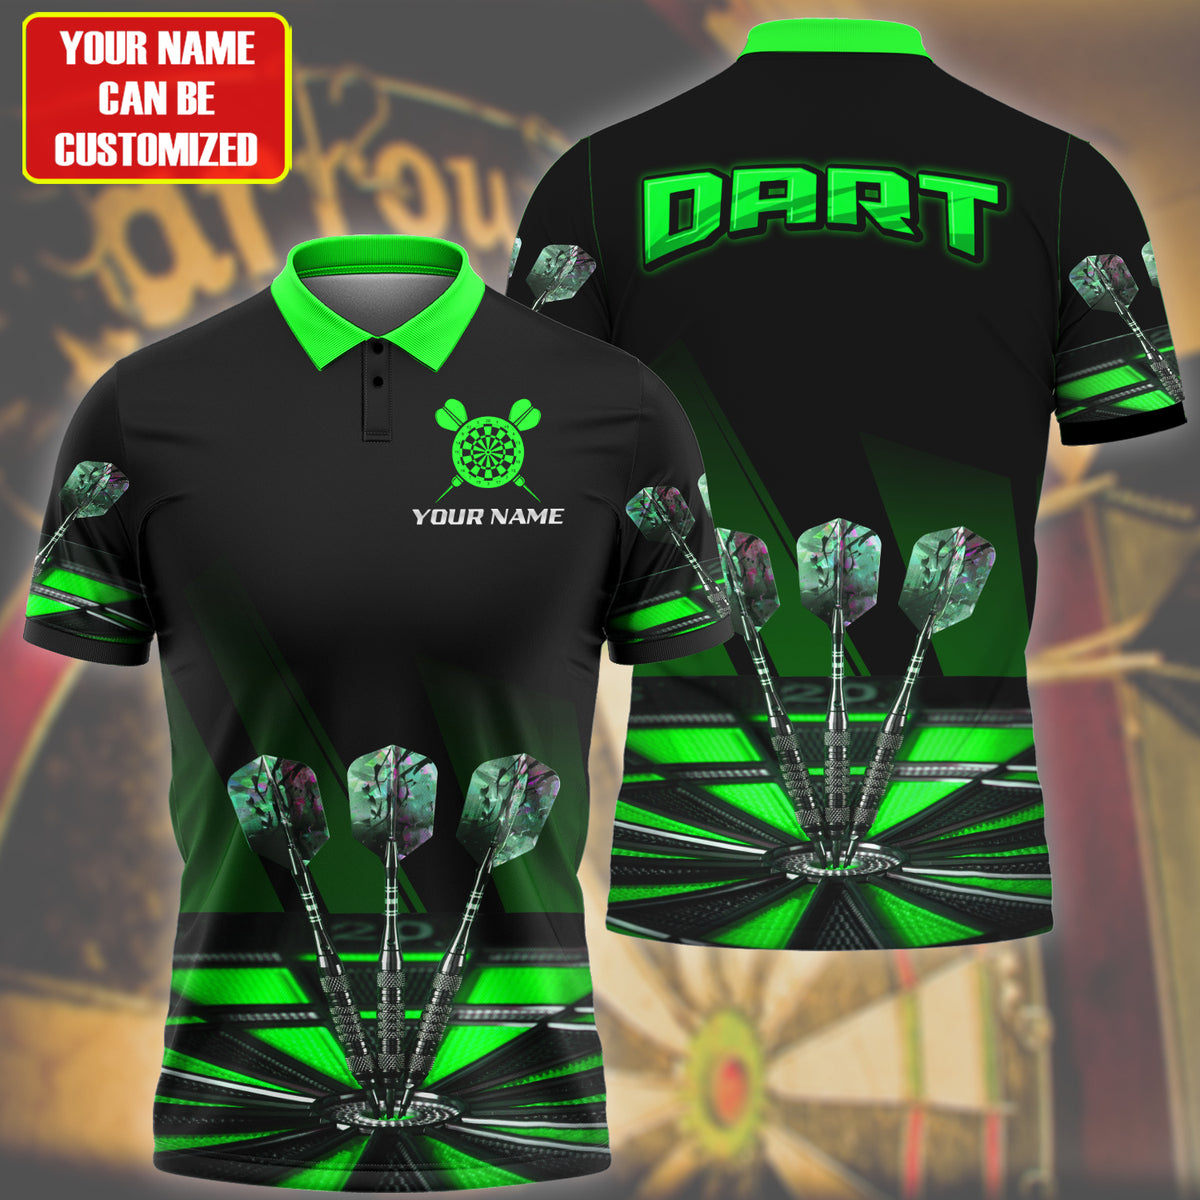 3D All Over Print Multi Color Dart Polo Shirt/ Gift for Dad and Son/ Dart Team Uniform